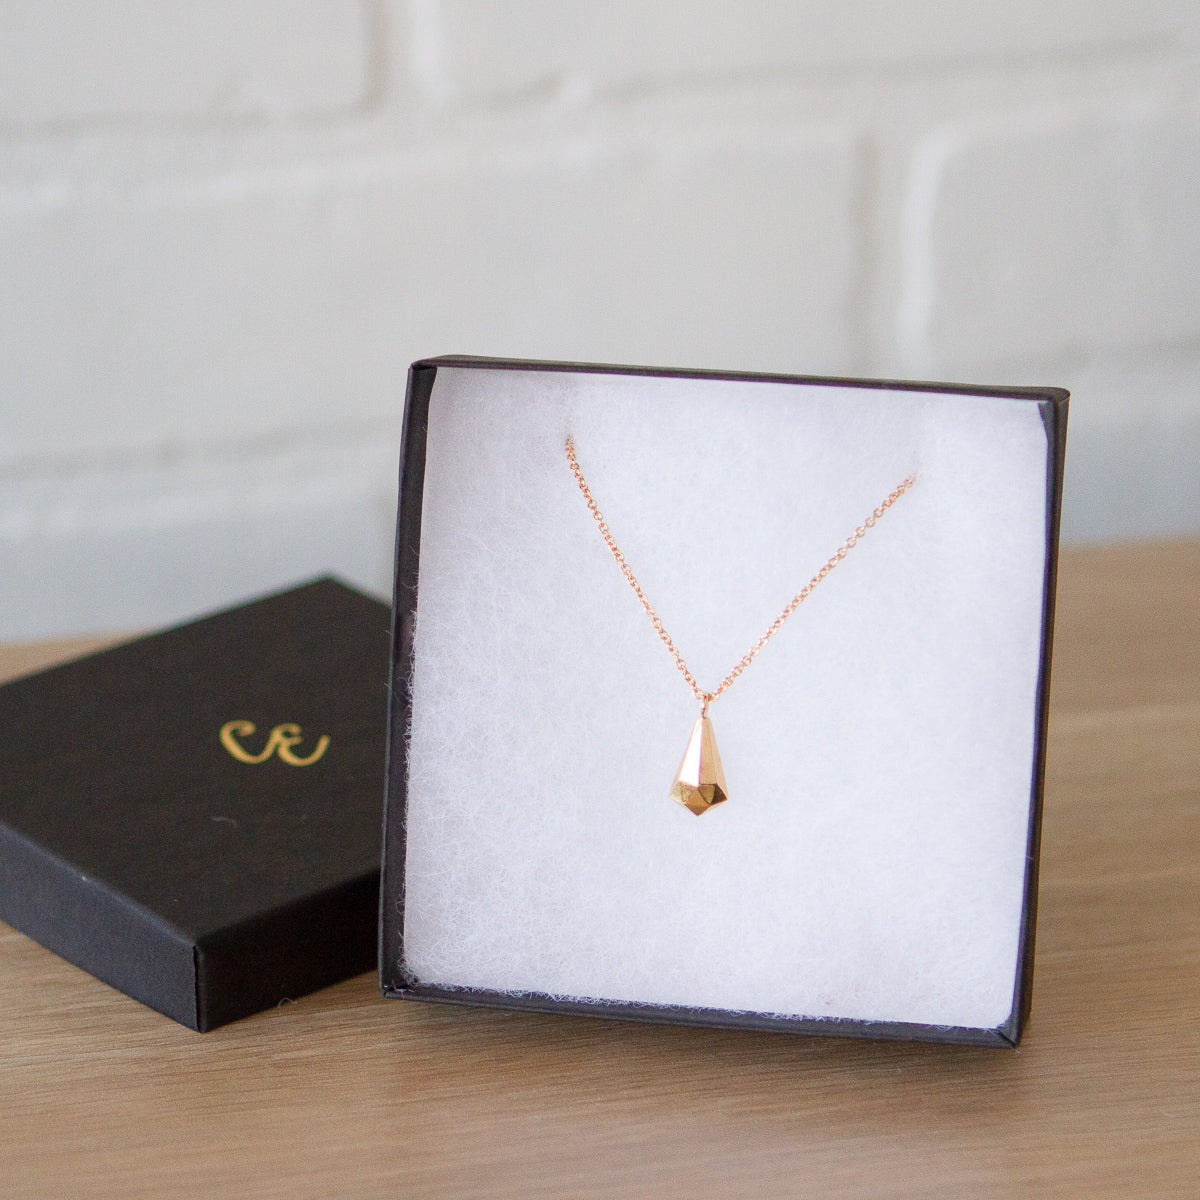 Vermeil faceted Crystal Fragment Necklace in a gift box